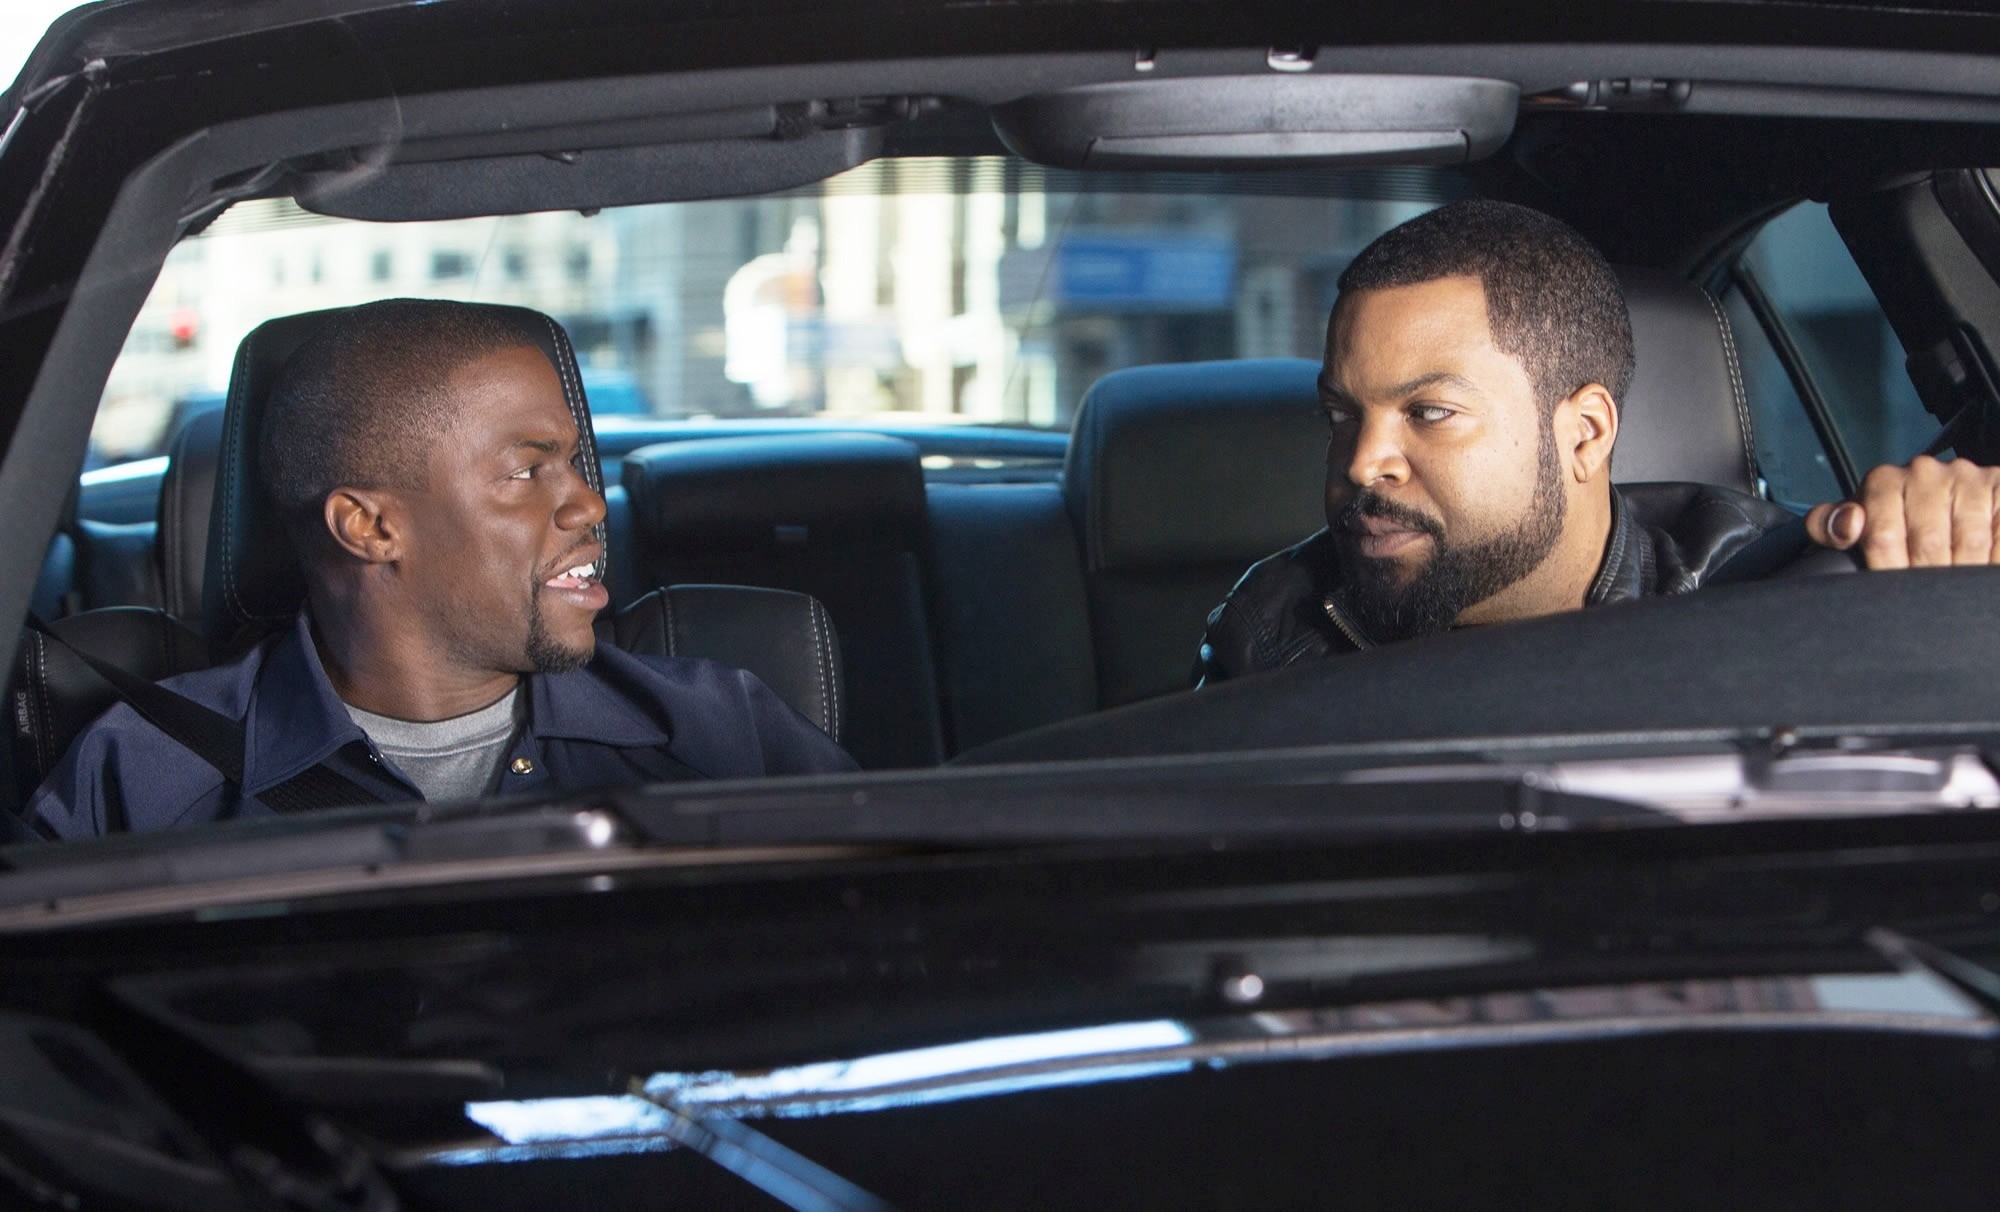 Kevin Hart stars as Ben Barber and Ice Cube stars as James in Universal Pictures' Ride Along (2014). Photo credit by Quantrell D. Colbert.